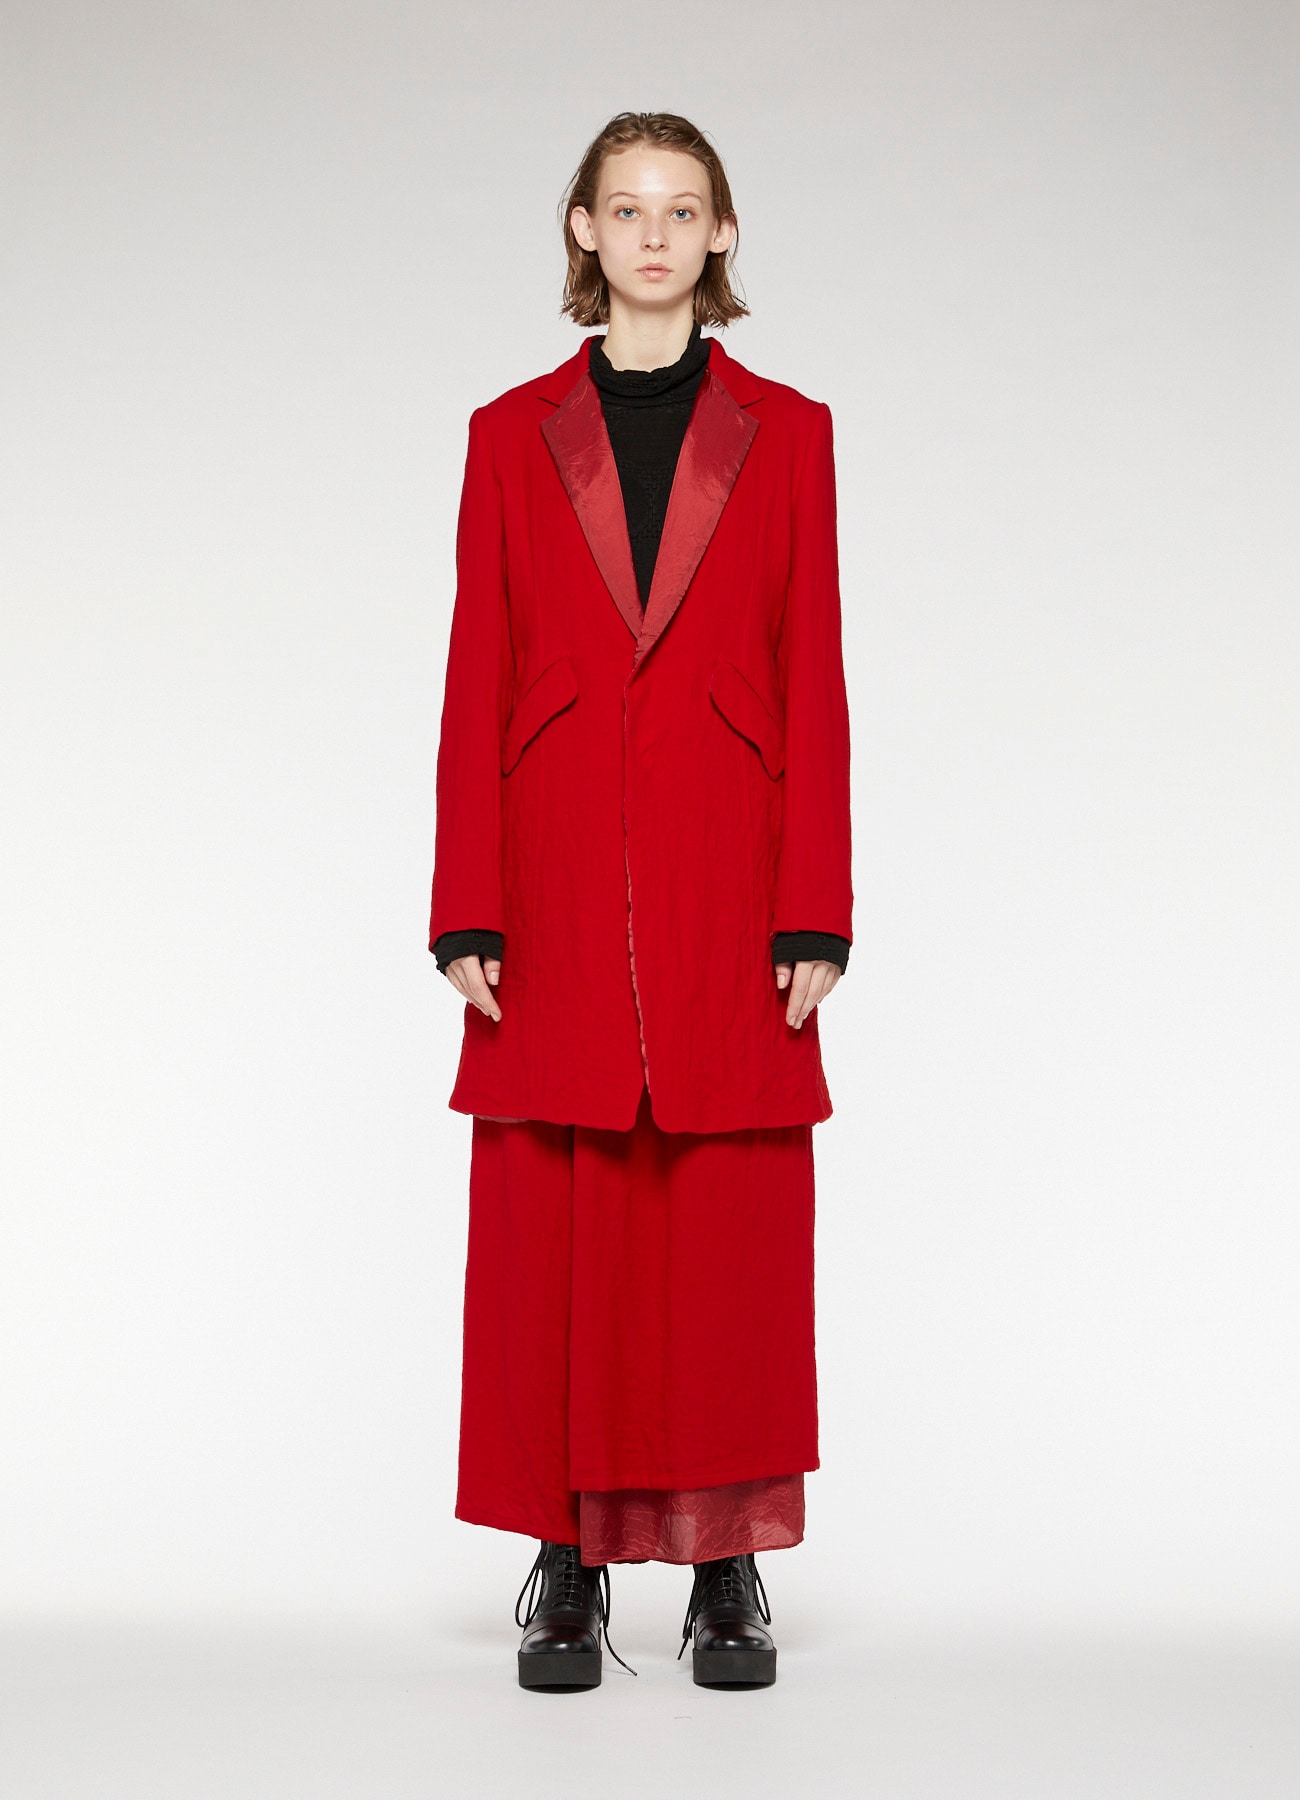 WOOL ROUGH TWILL GARMENT MILLING LONG TAILORED JACKET(XS Red